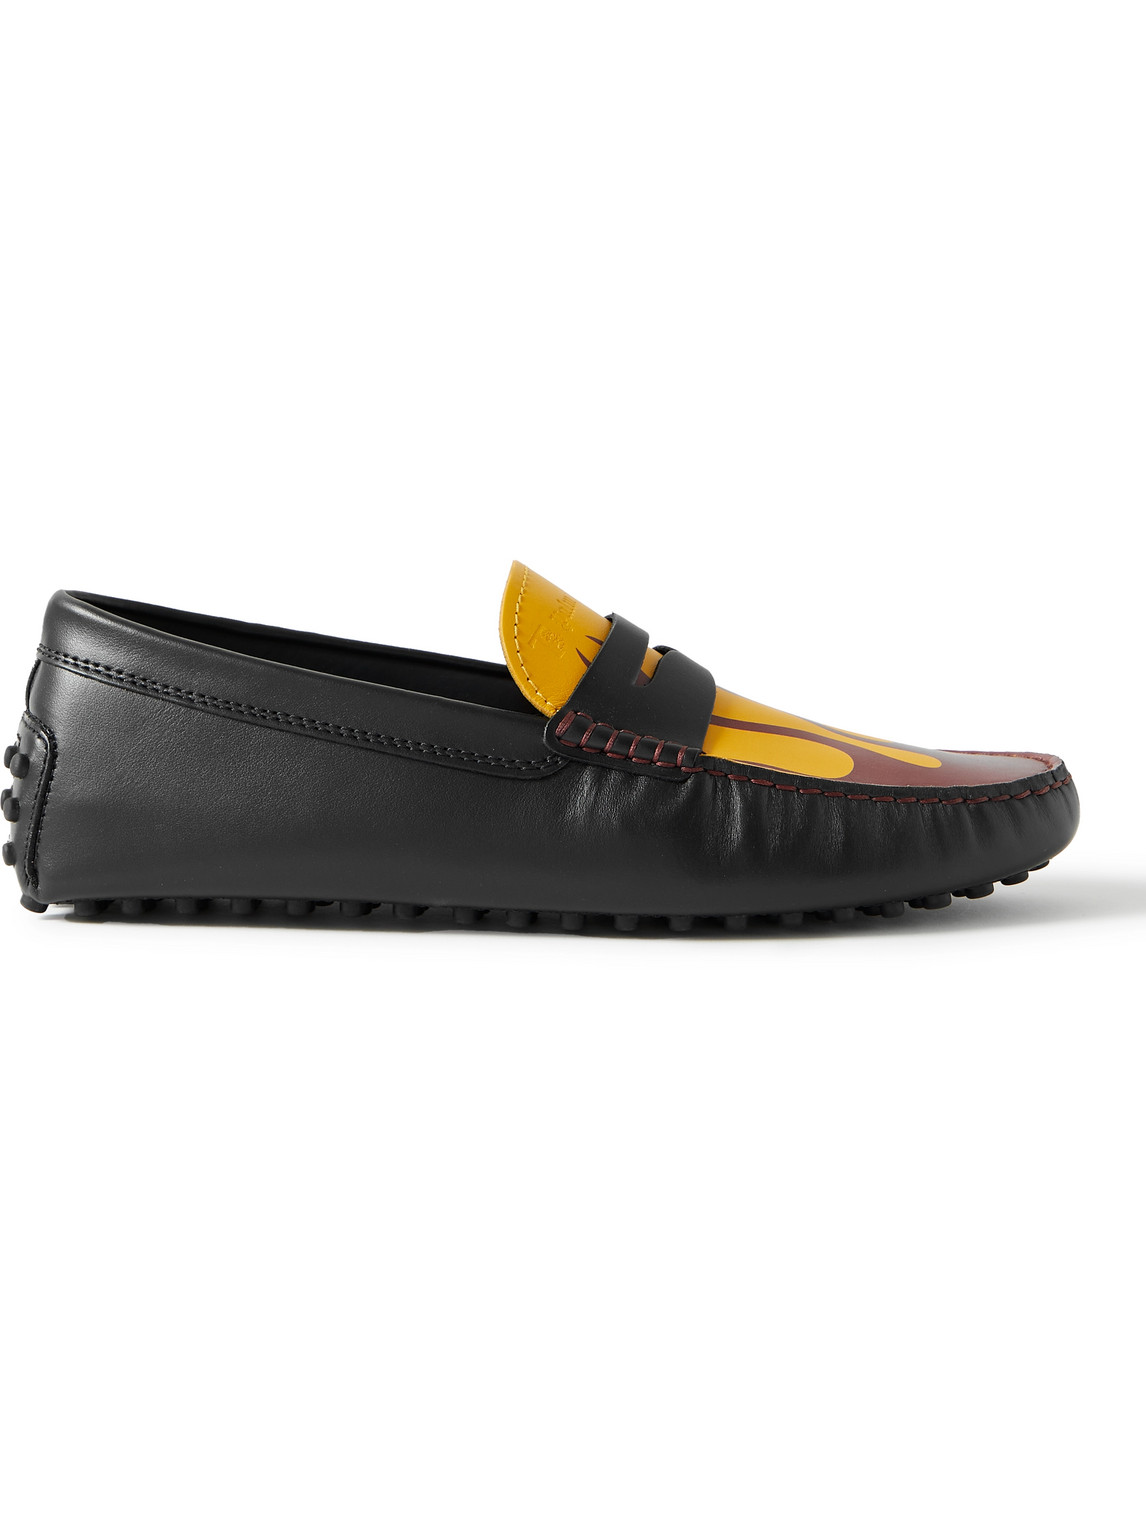 Moncler Genius Palm Angels Tod's Gommino Printed Leather Driving Shoes